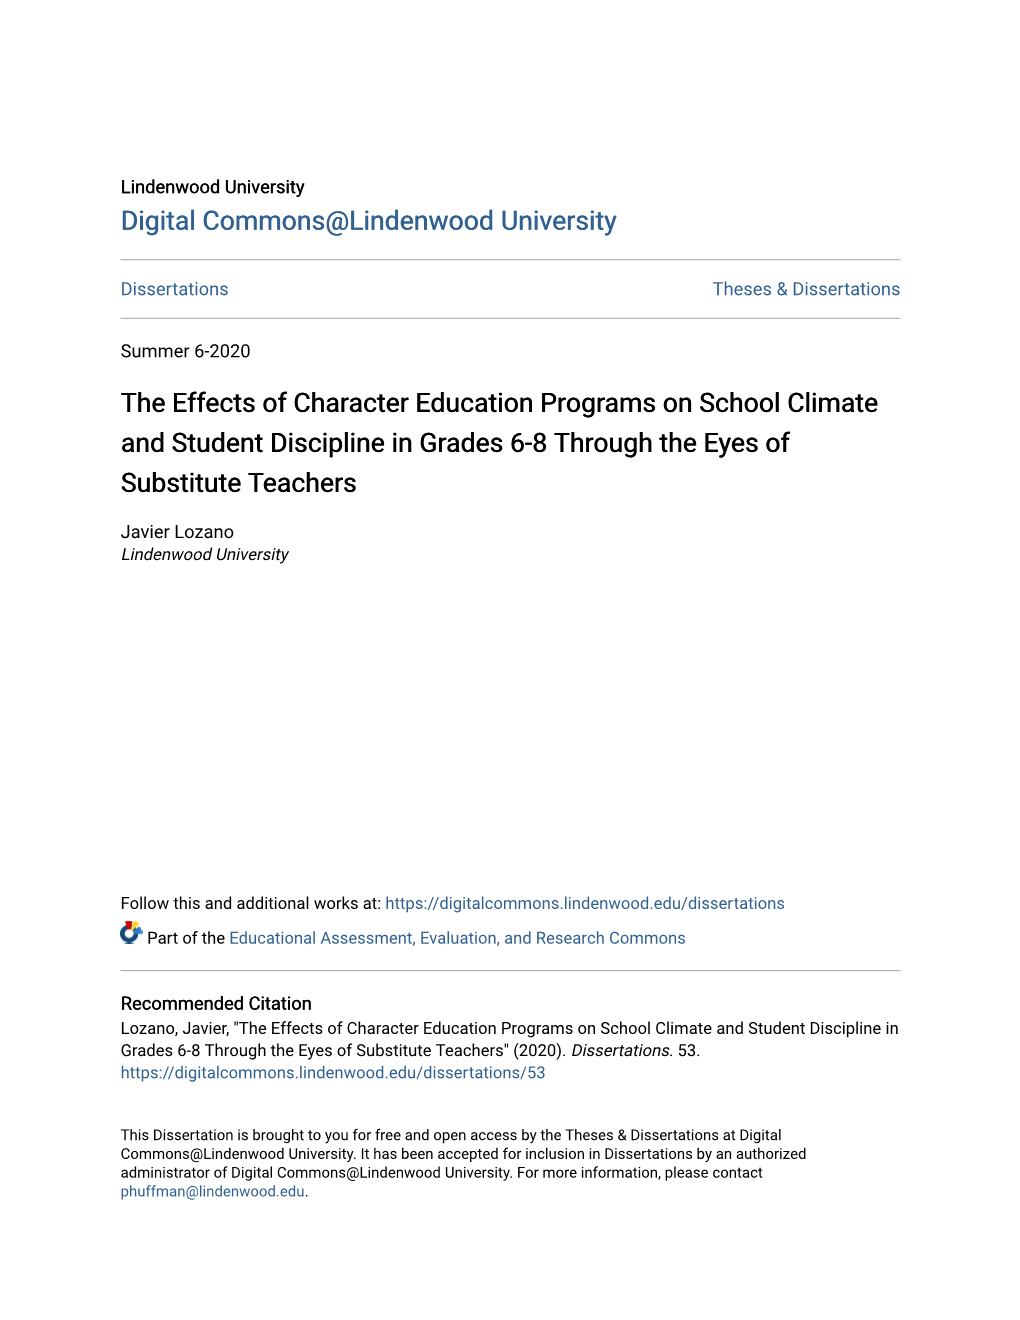 The Effects of Character Education Programs on School Climate and Student Discipline in Grades 6-8 Through the Eyes of Substitute Teachers